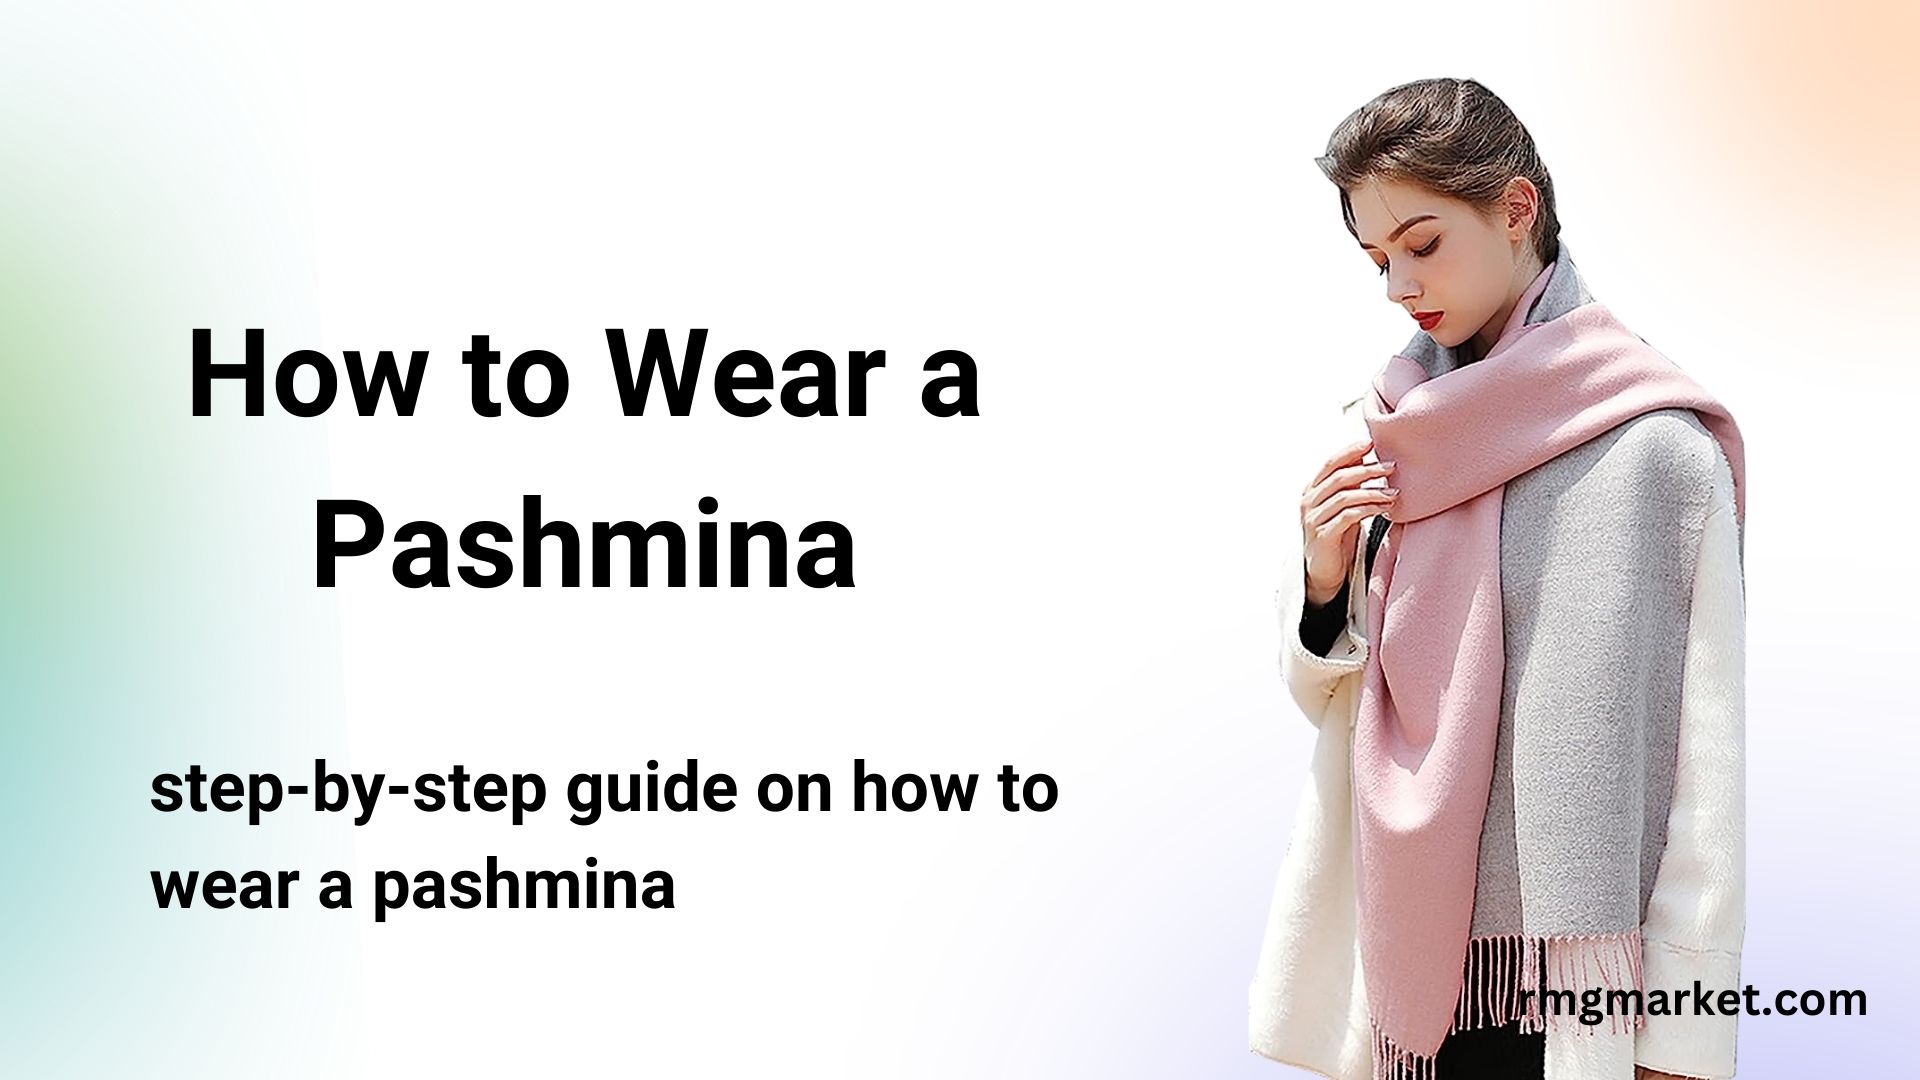 How to Wear a Pashmina